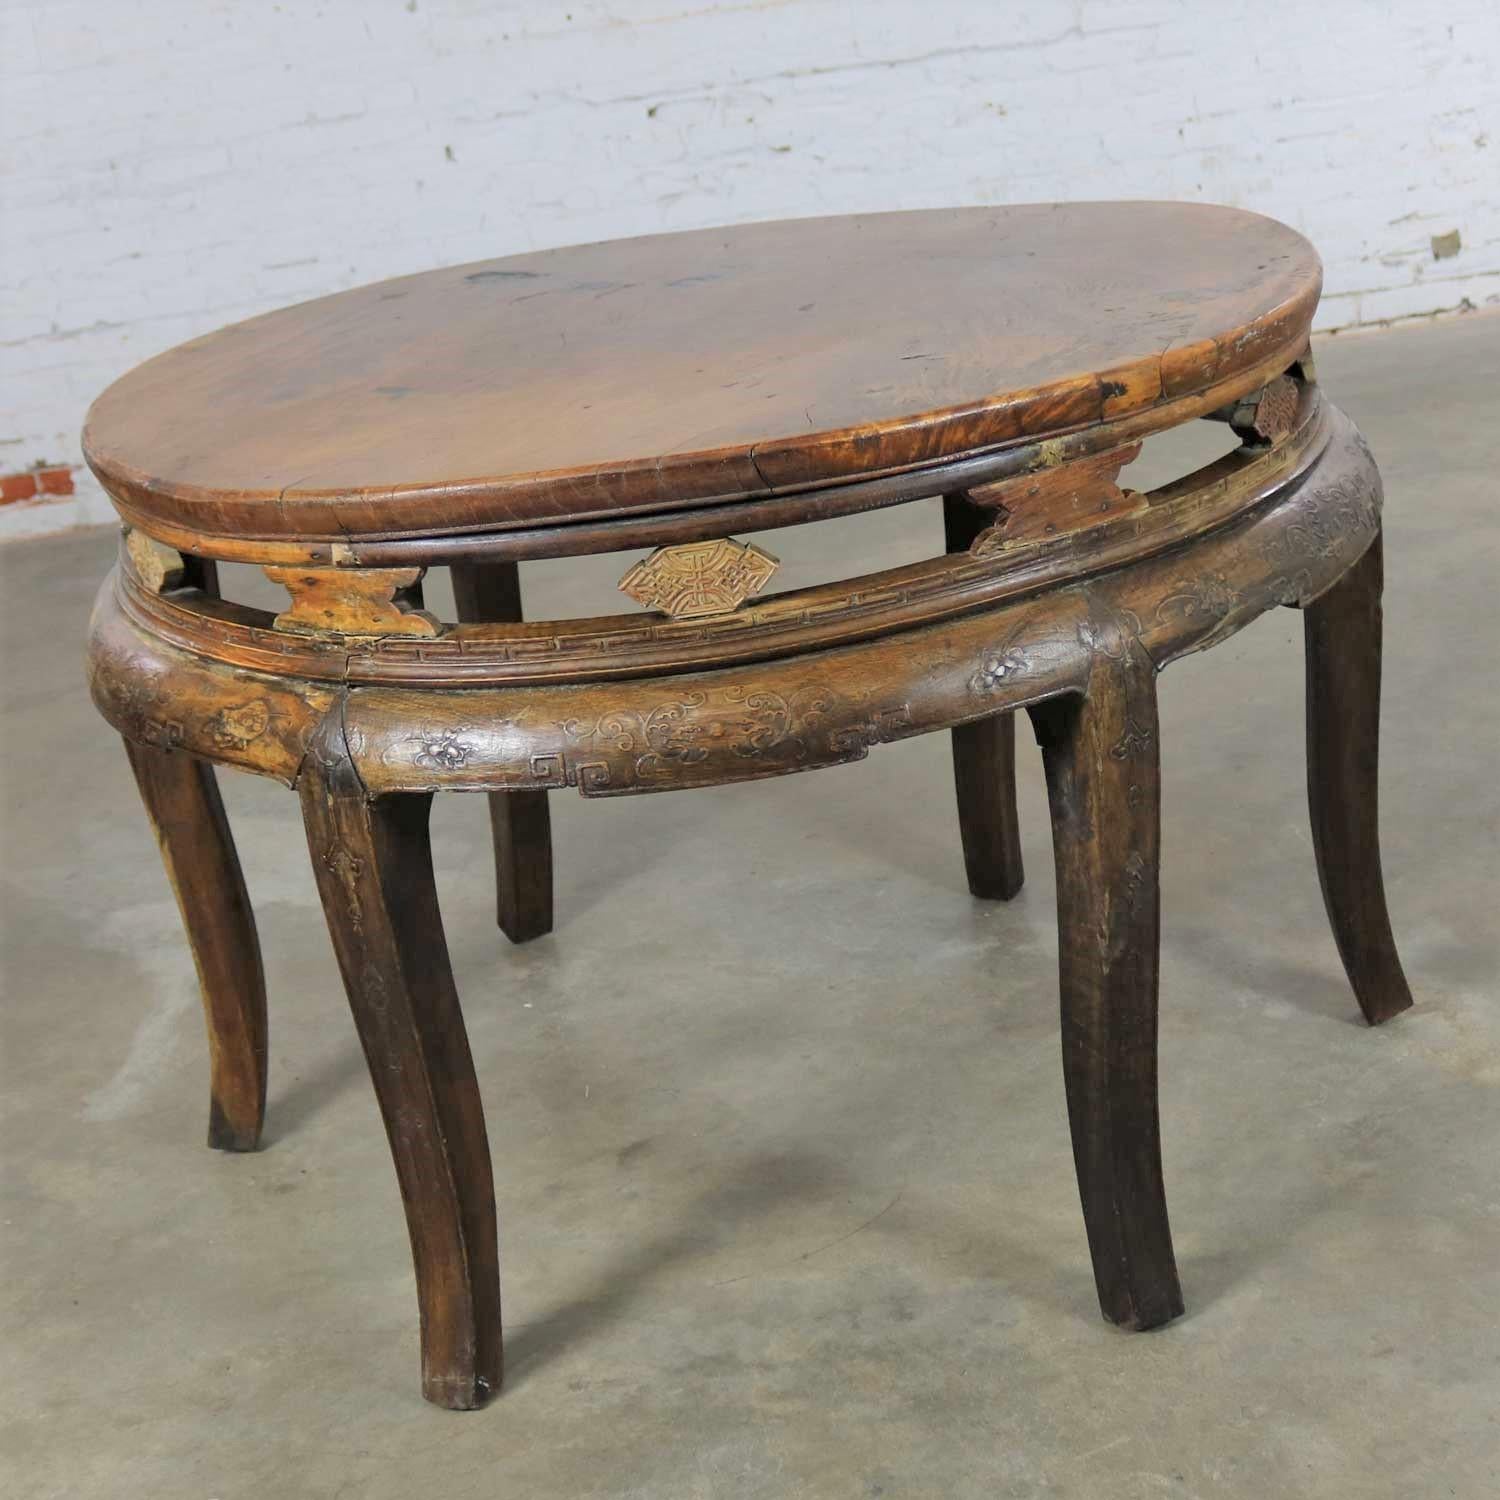 Handsome antique Chinese round and hand carved center table of elm wood. This table is in good antique condition with lots and lots of gorgeous age patina including patched spots, uneven surfaces, warping, nicks and dings. We consider these things